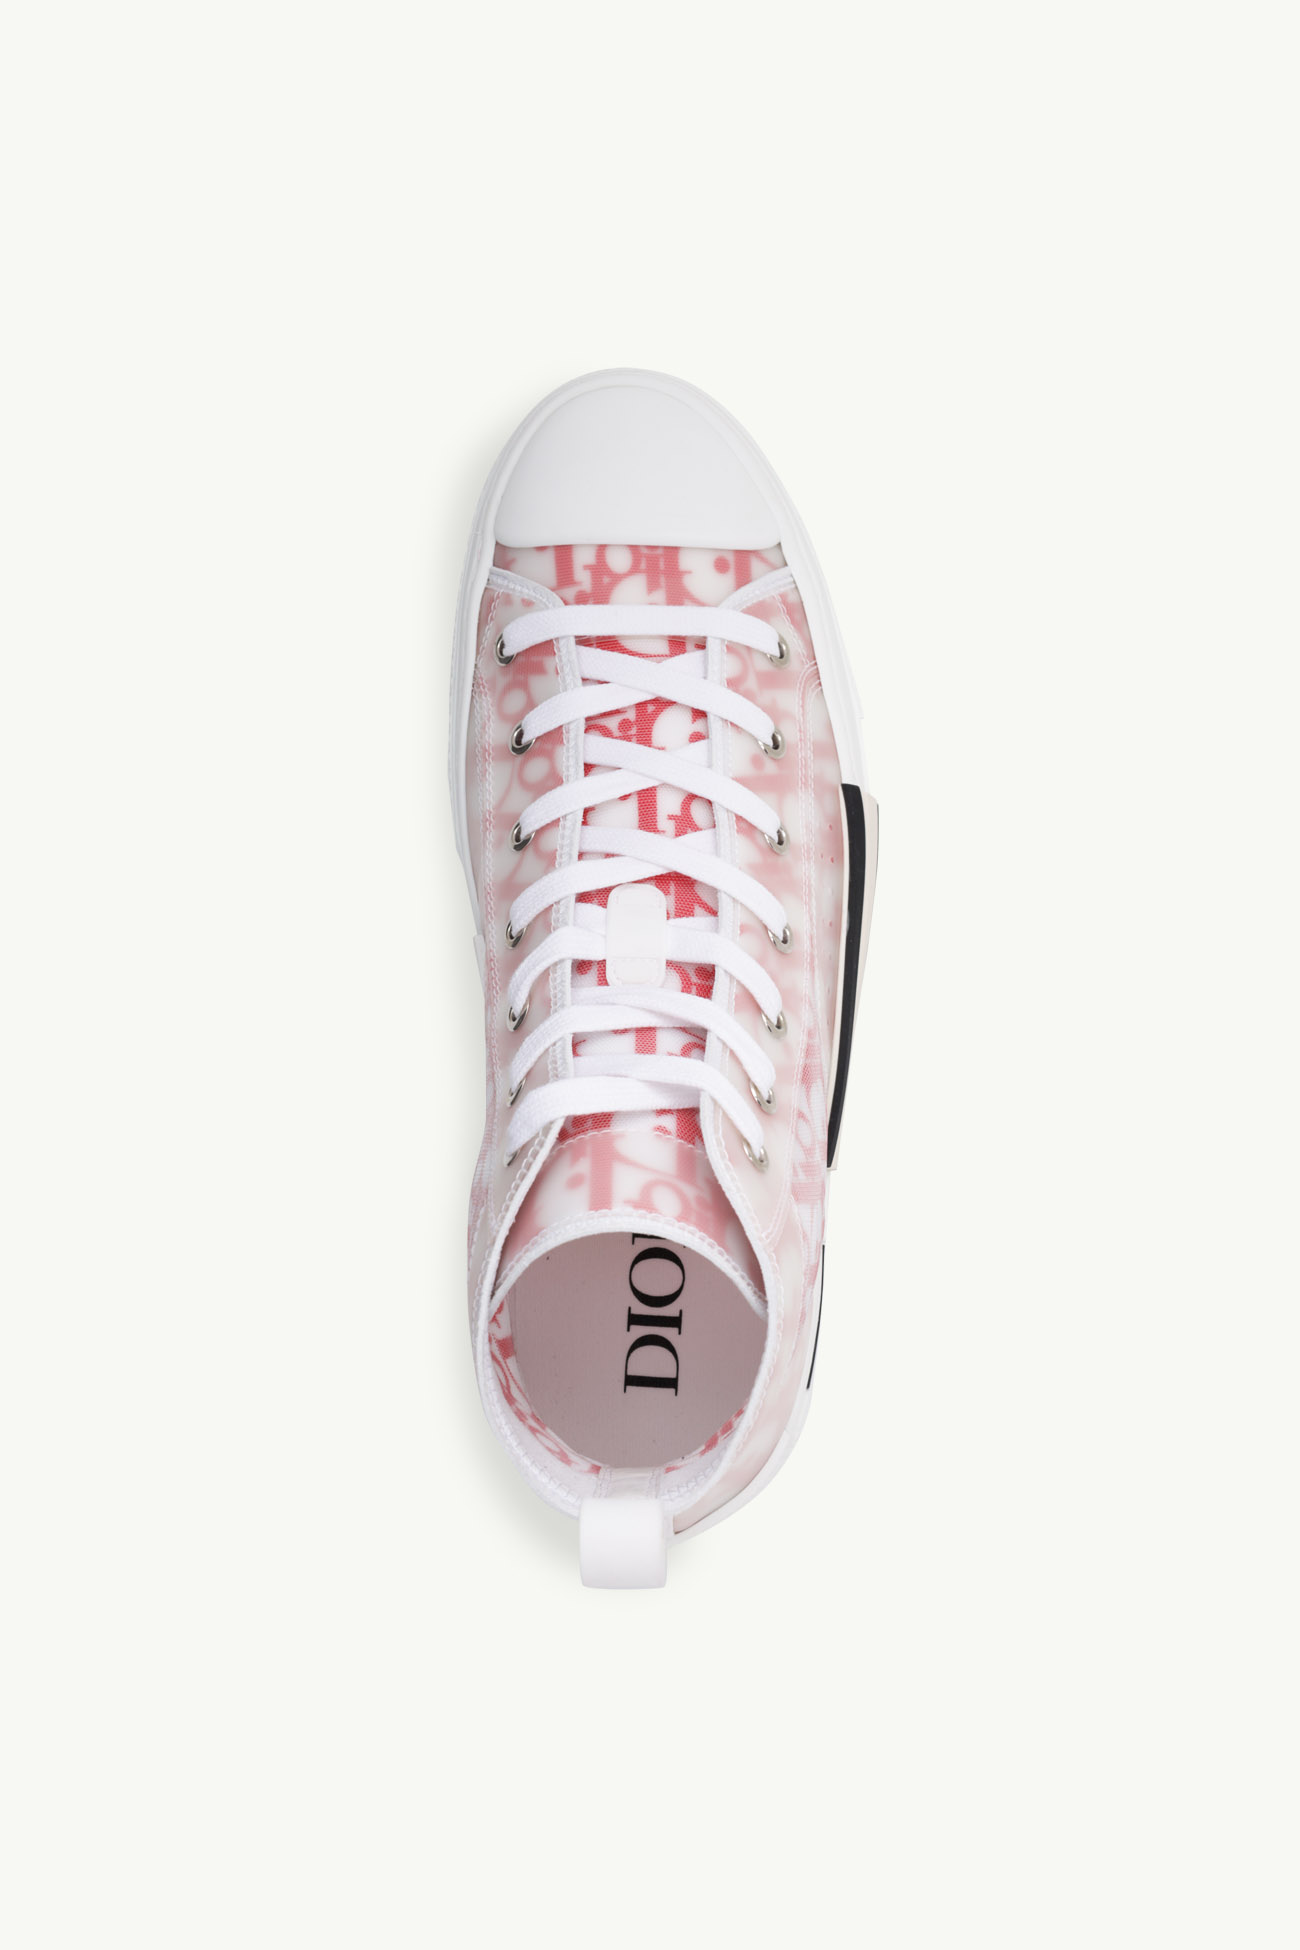 CHRISTIAN DIOR B23 Oblique High Top Sneakers in White/Red 3